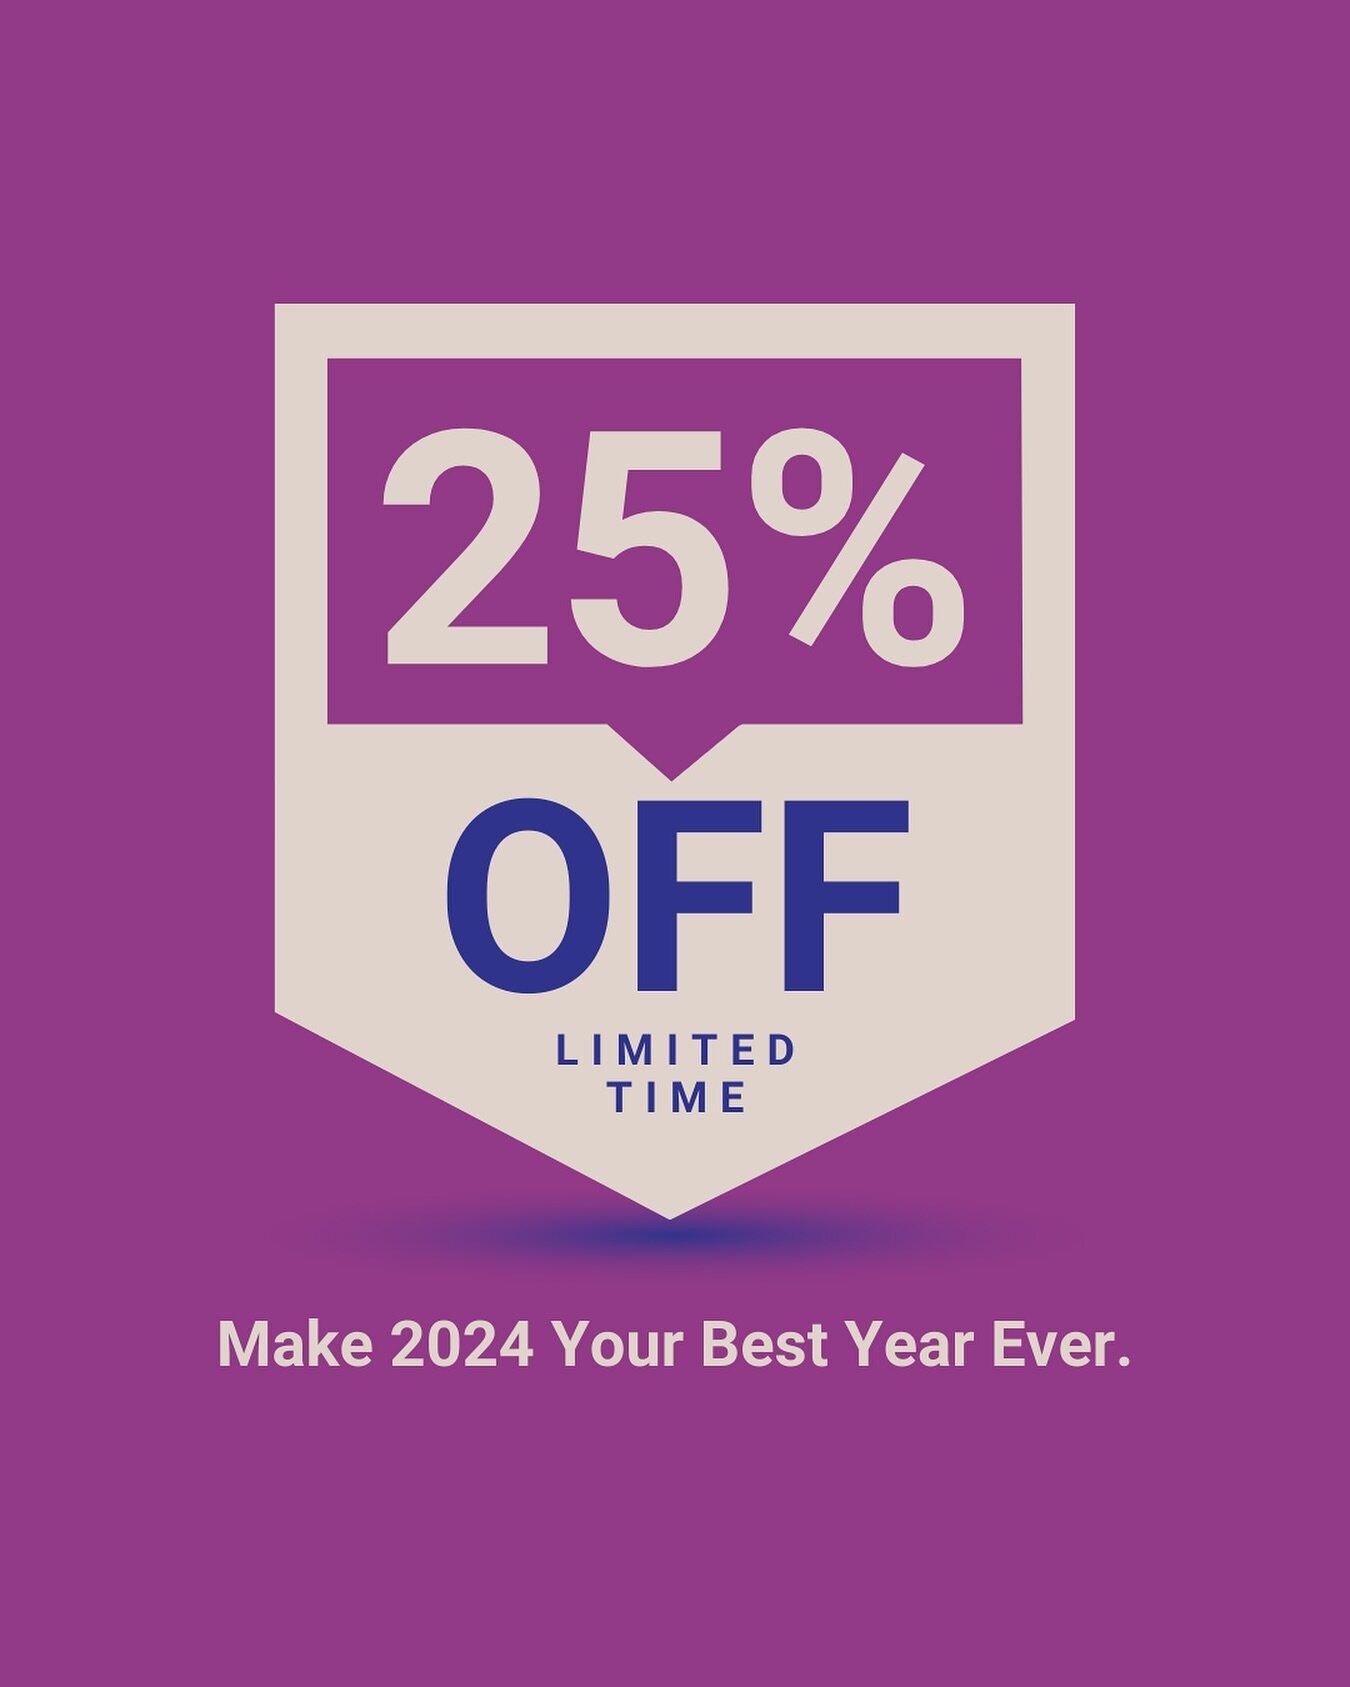 Did you know you can maximize savings for Your Best Year Ever?

Sign up for an annual membership at $150, only if purchased in January (regularly $300)! Start your 2024 strong and save big.

Sign up in our bio.

#annualsavings #newyearnewsavings #you